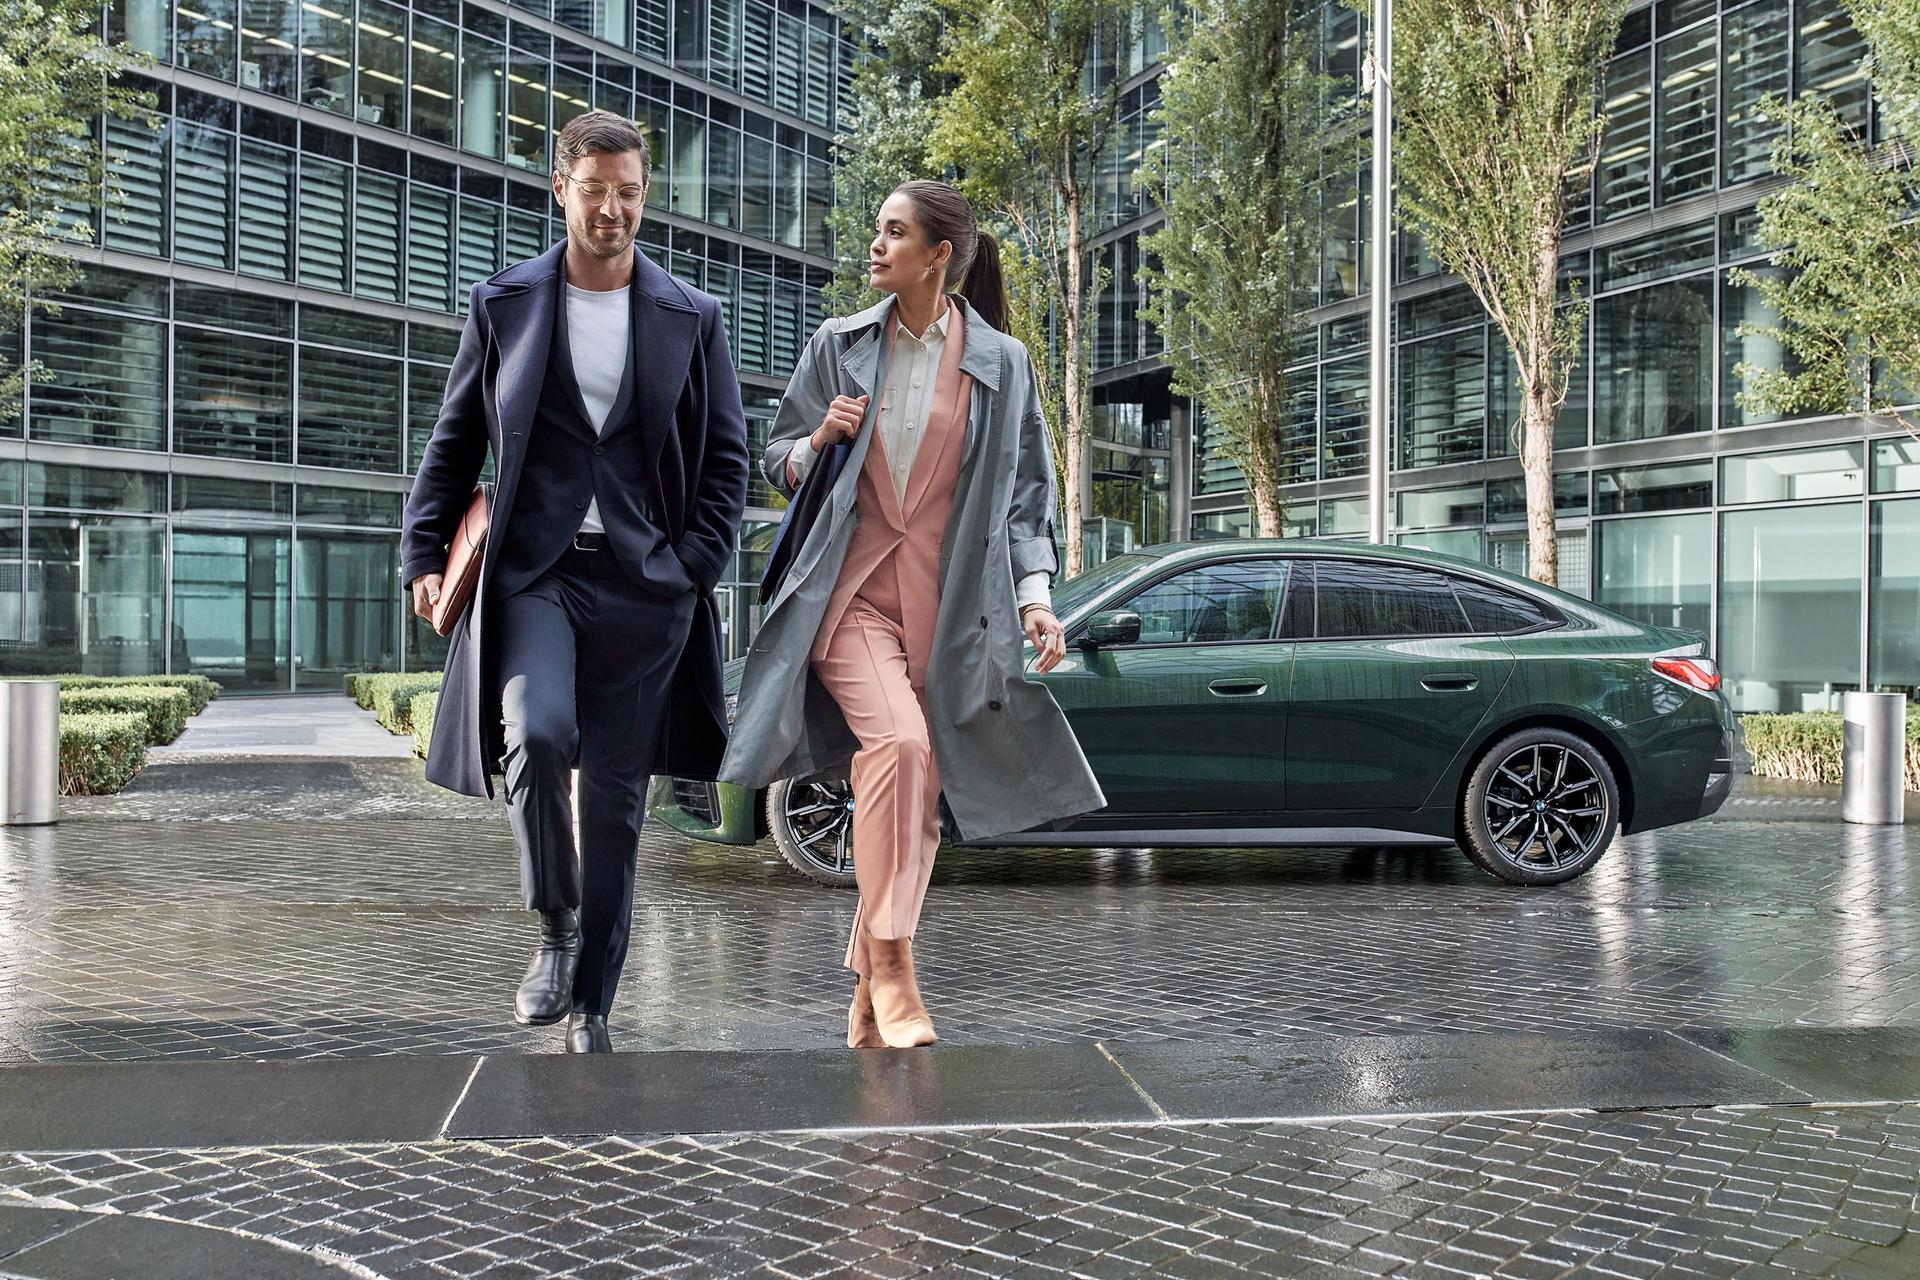 colleagues-bmw-outside